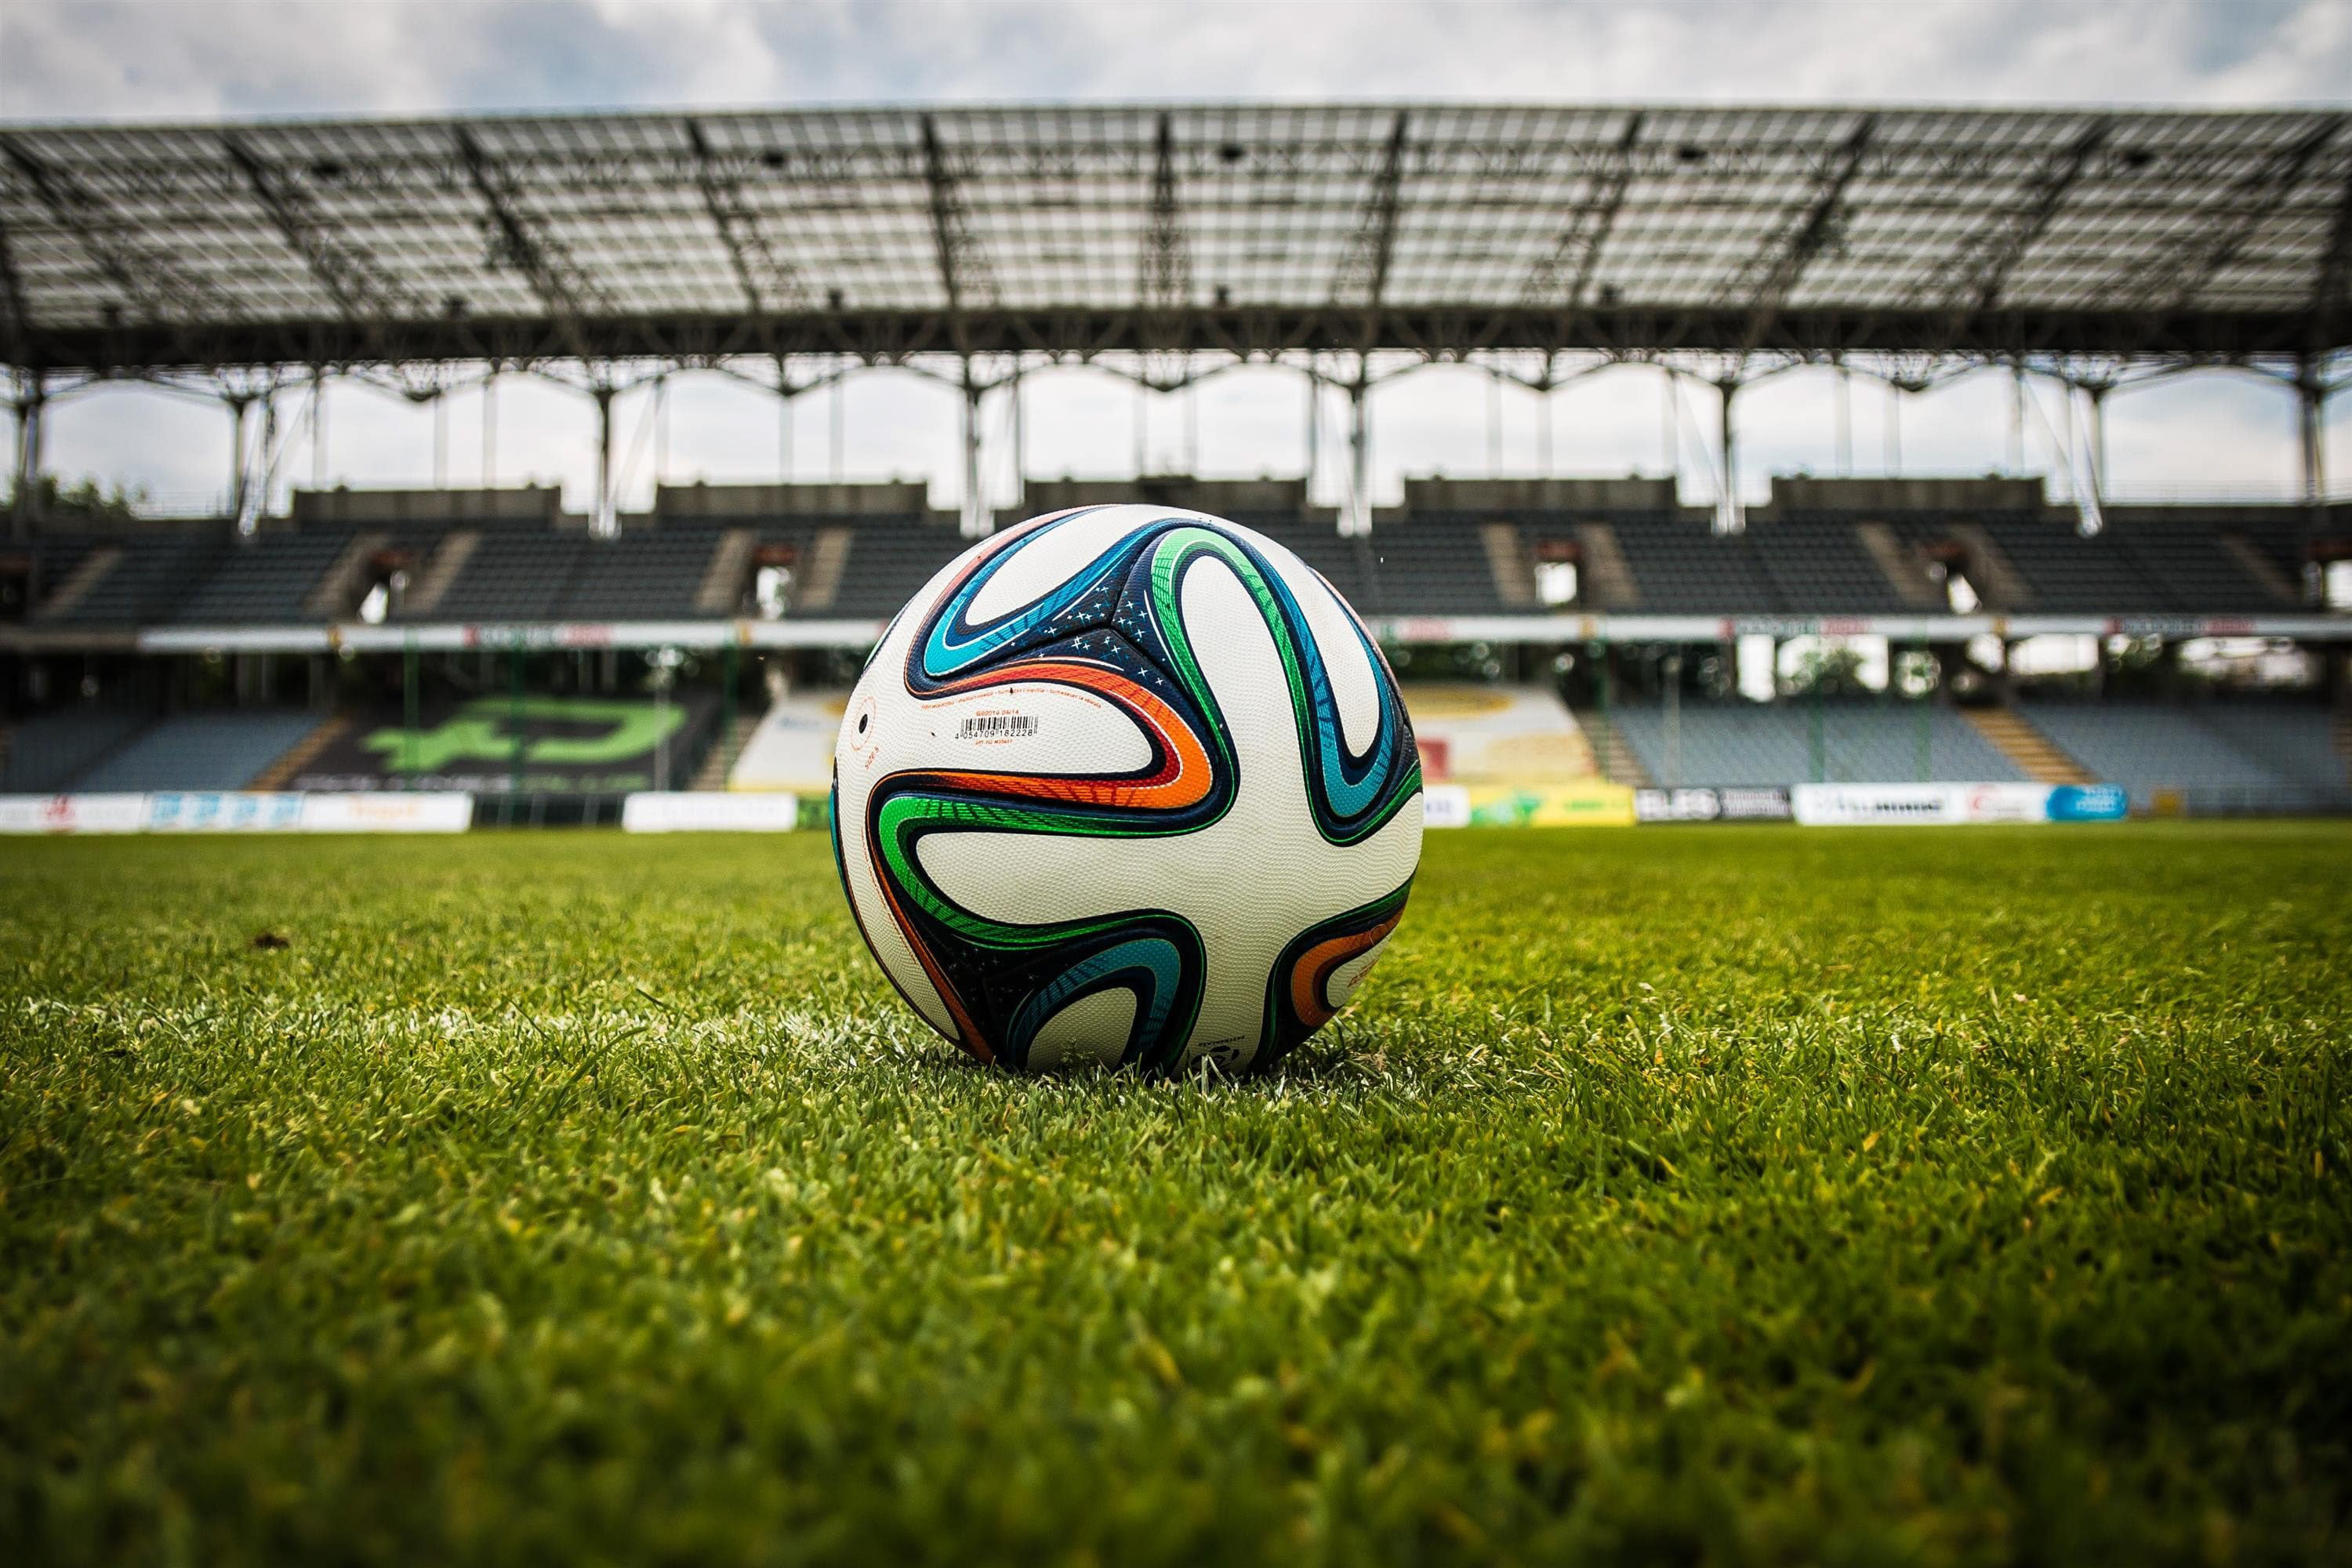 2014 world cup ball on field